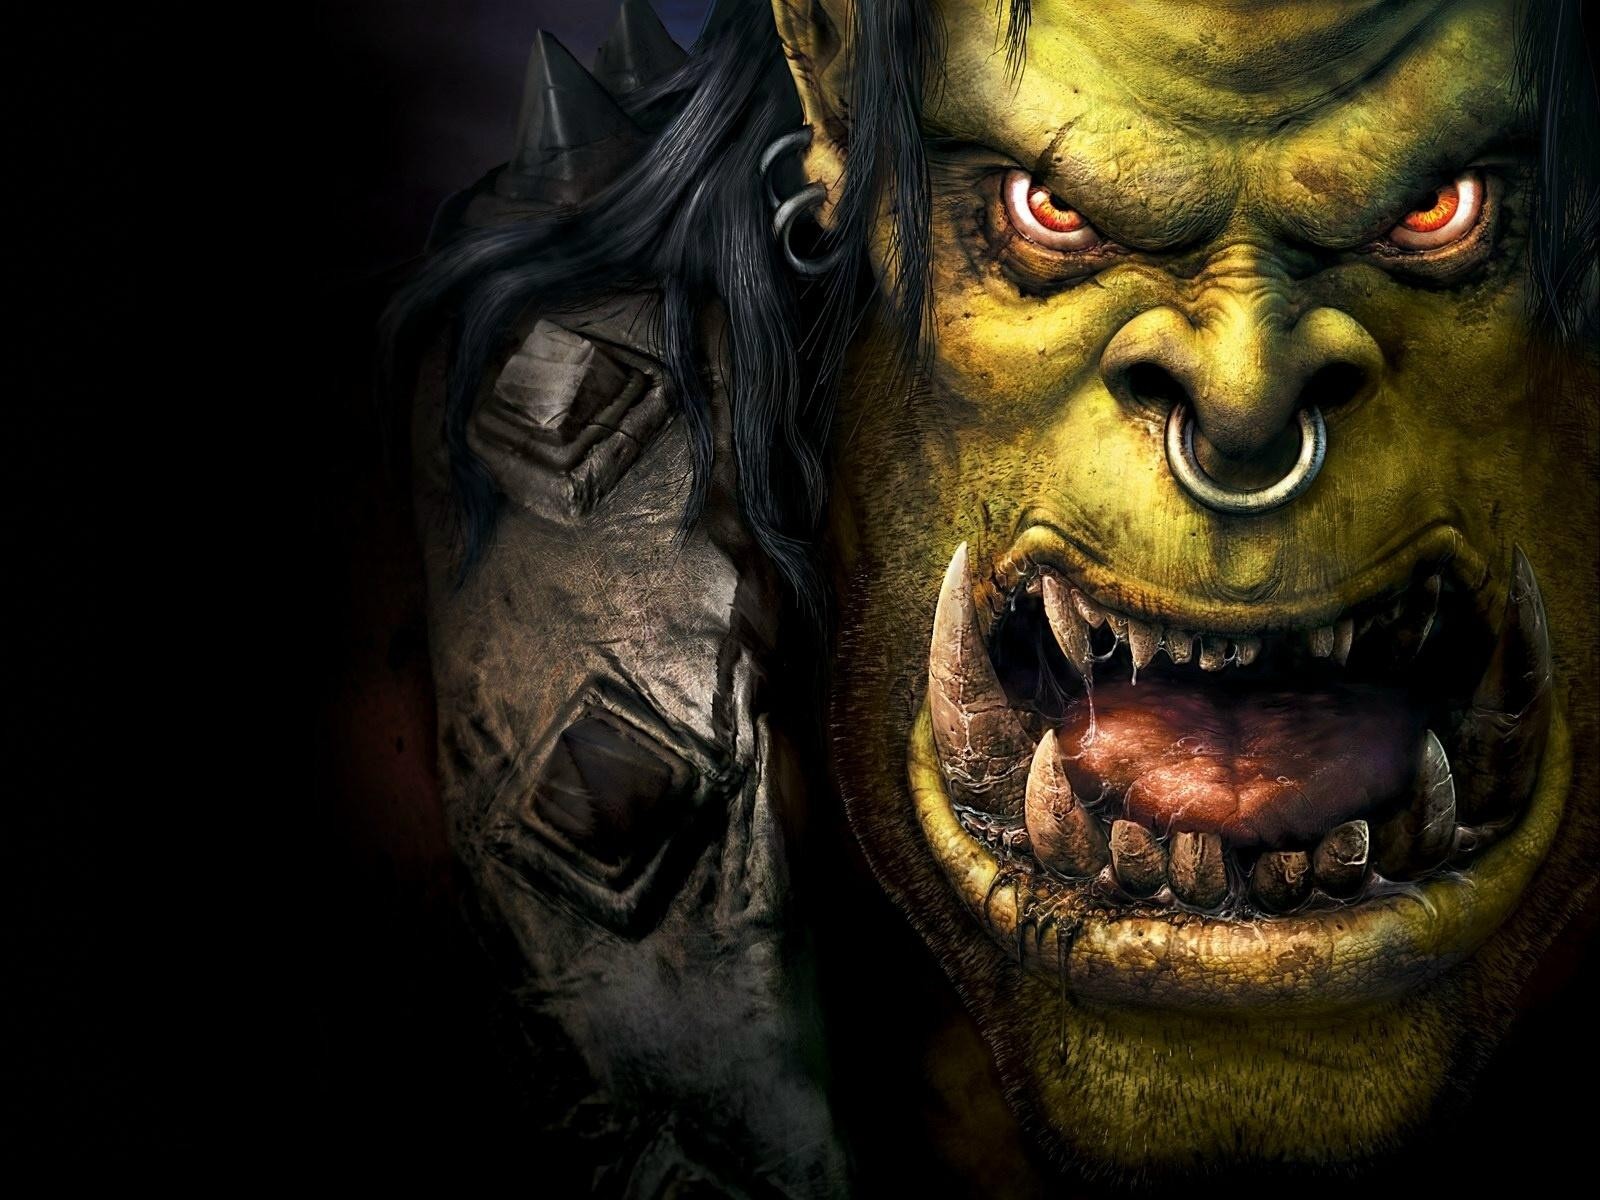 General 1600x1200 video games Thrall Orc WOW 3 PC gaming Blizzard Entertainment video game art fangs creature fantasy art